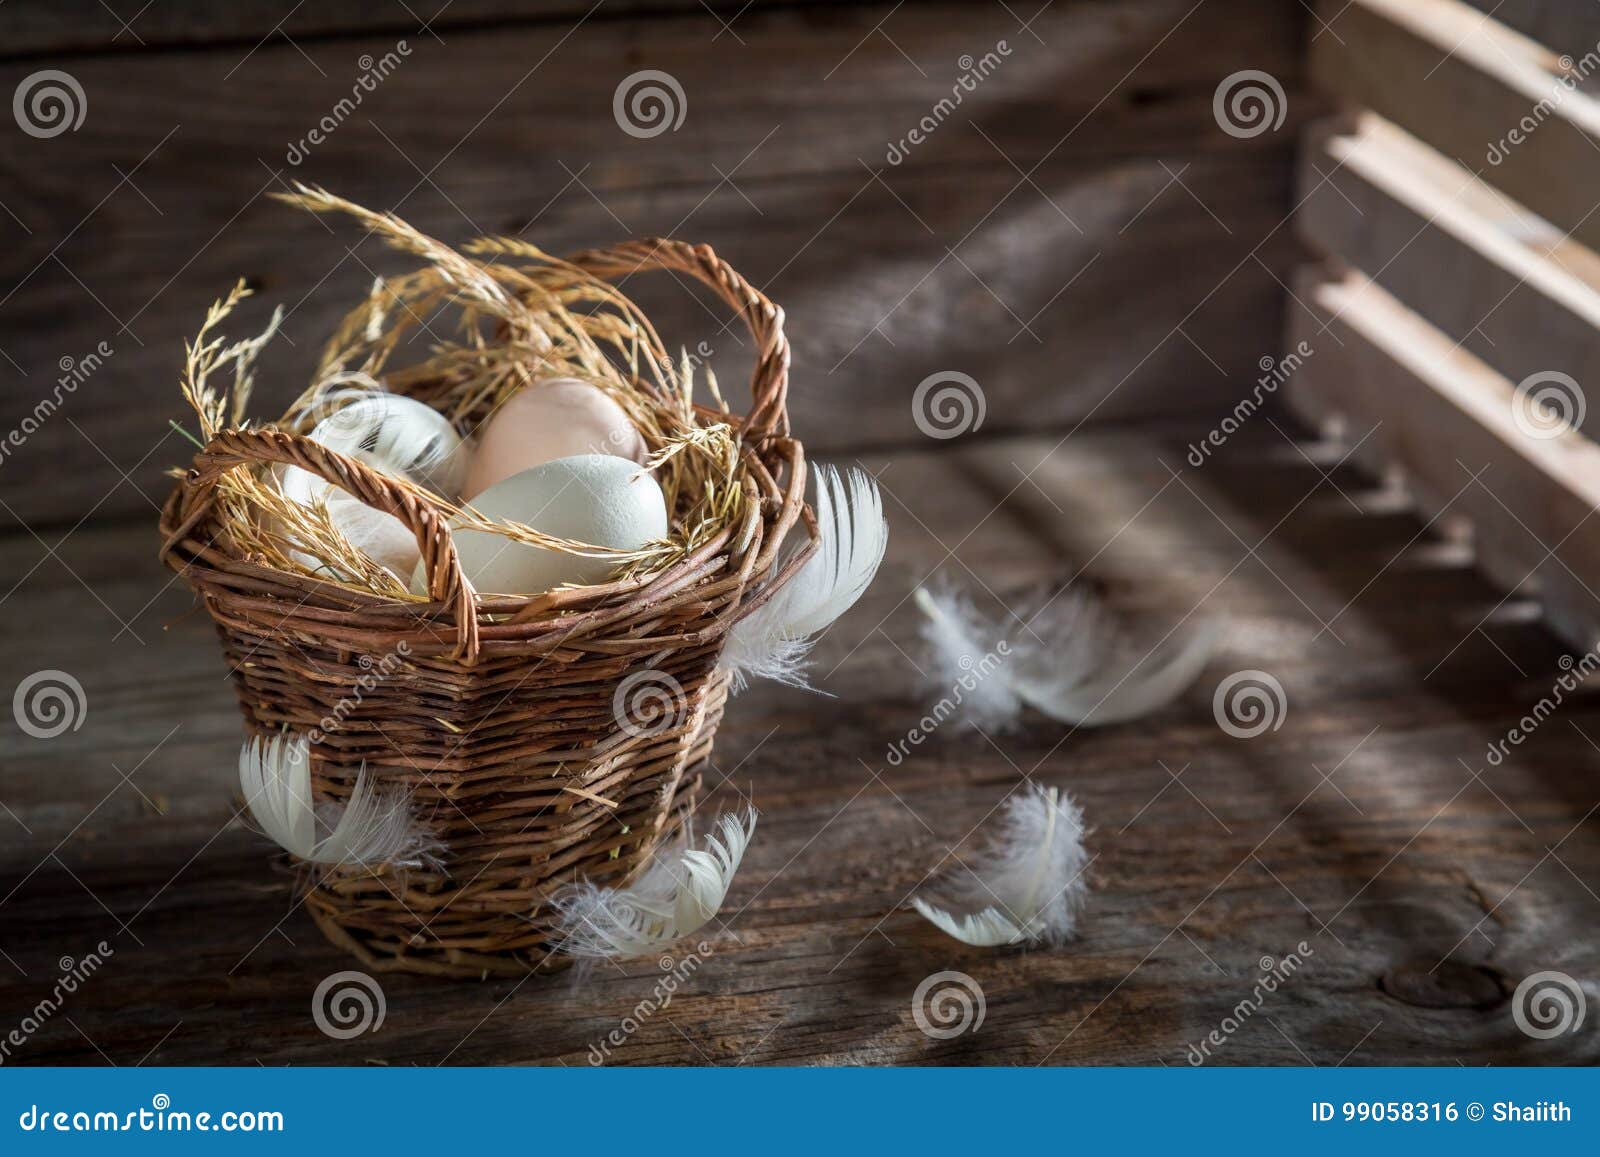 Countryside Breakfast with Eggs Stock Photo Image of group, product